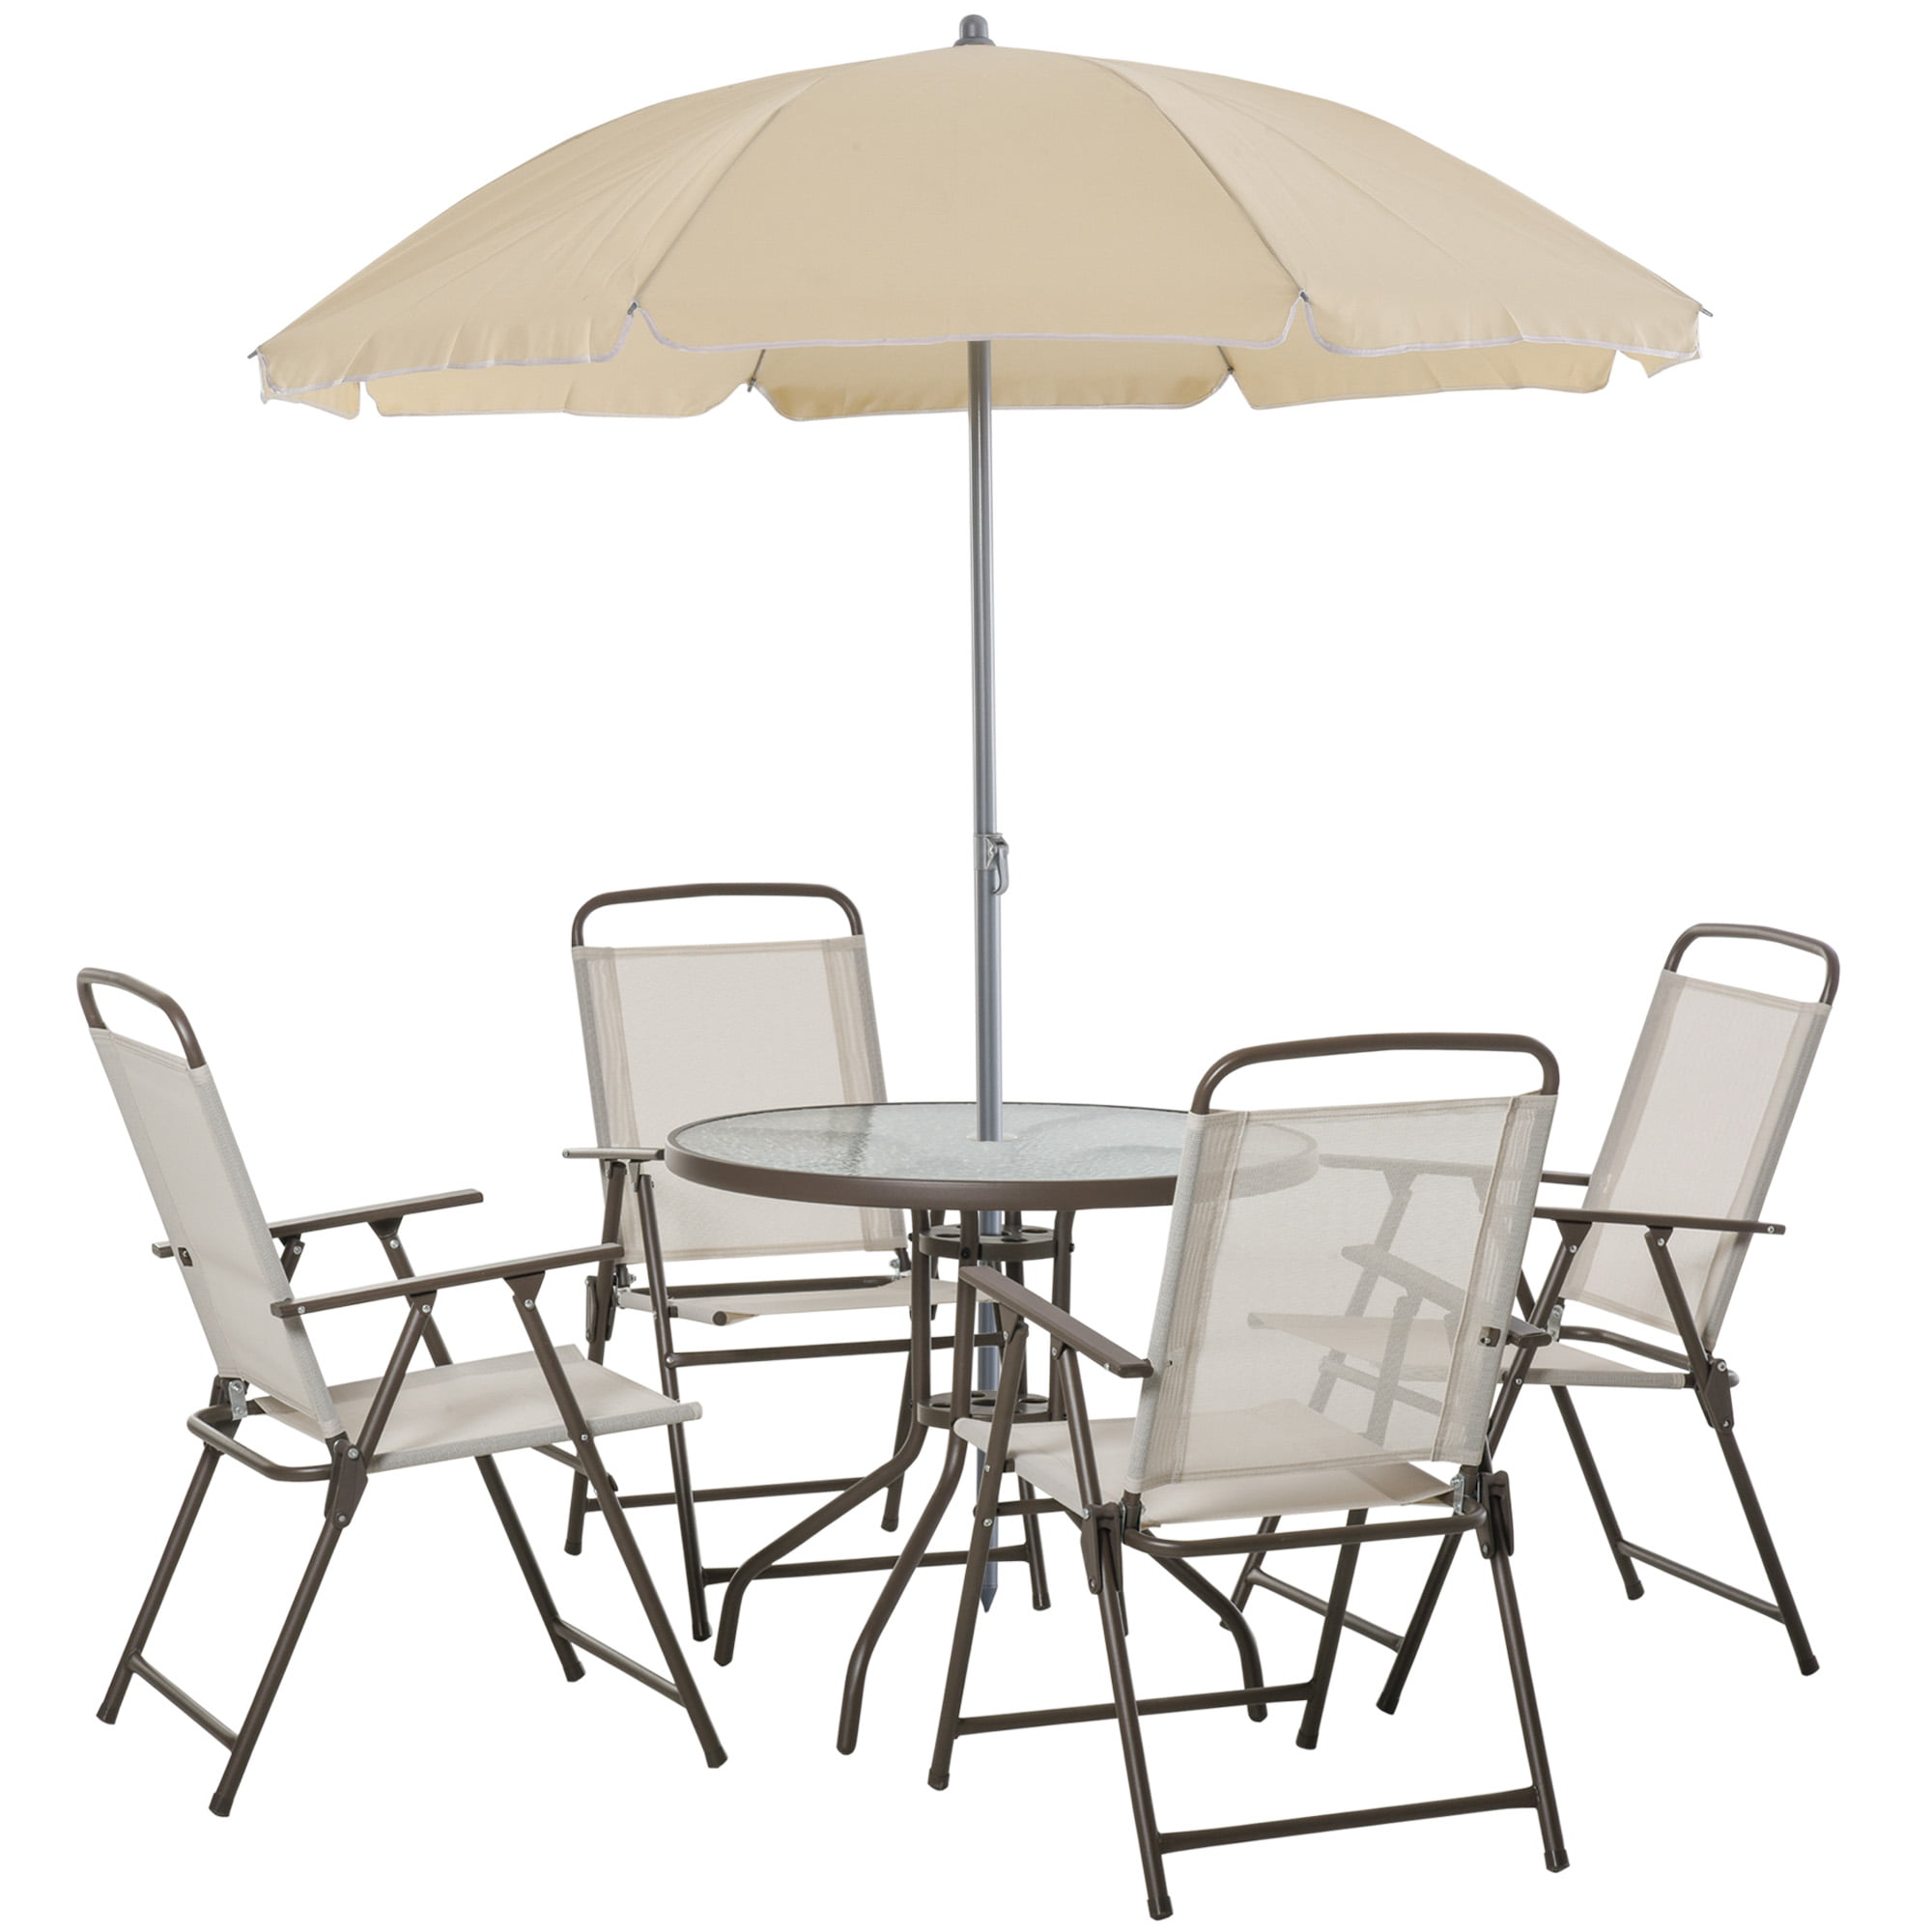 Outsunny 6pc Patio Dining Furniture Set, Folding Chairs Patio Dining Set